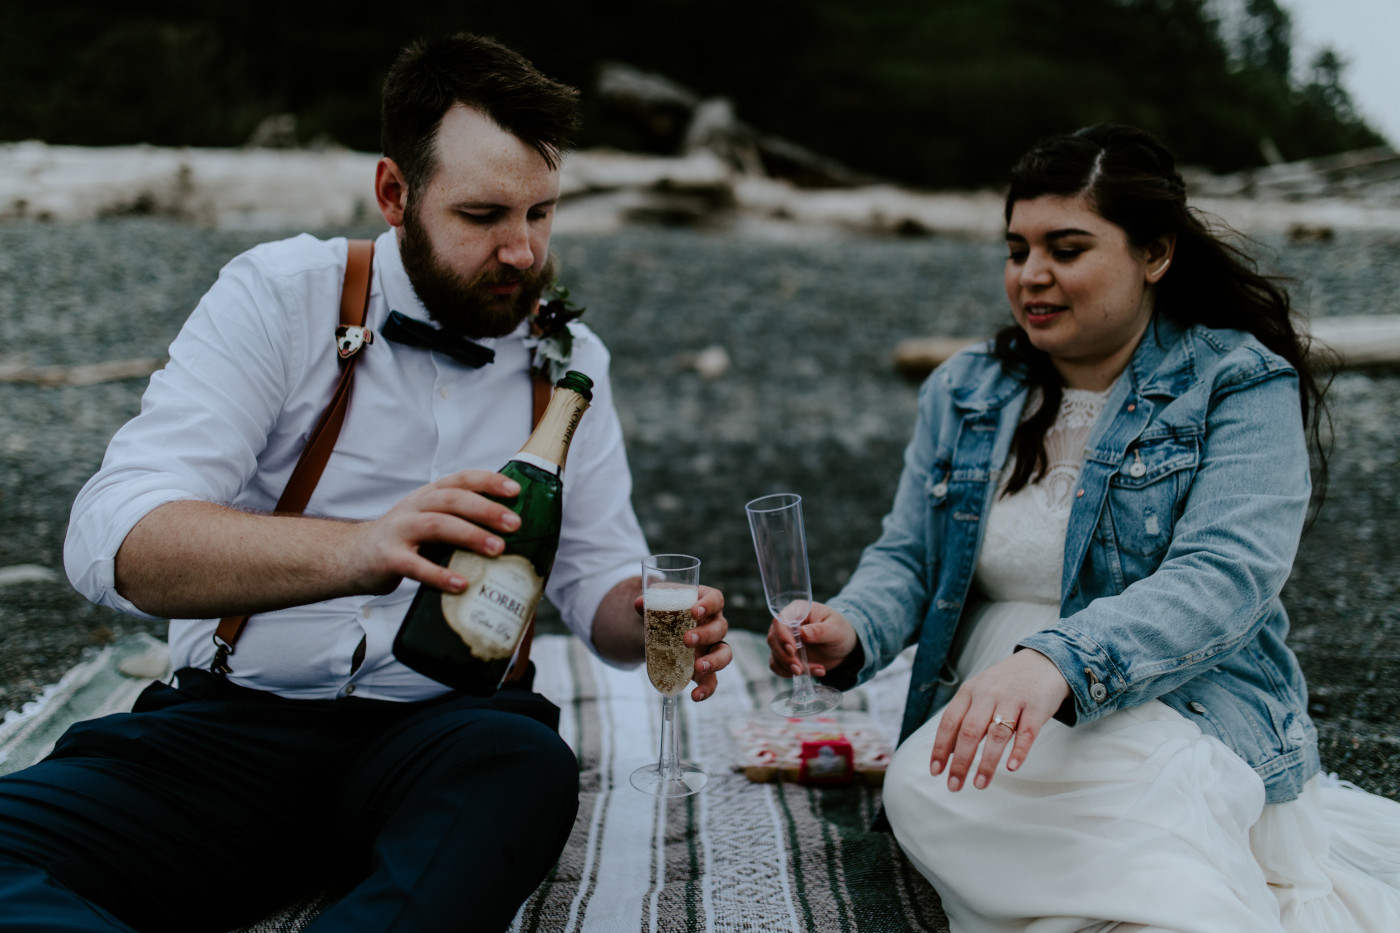 Jack pours champagne for Brooke. Elopement photography at Olympic National Park by Sienna Plus Josh.